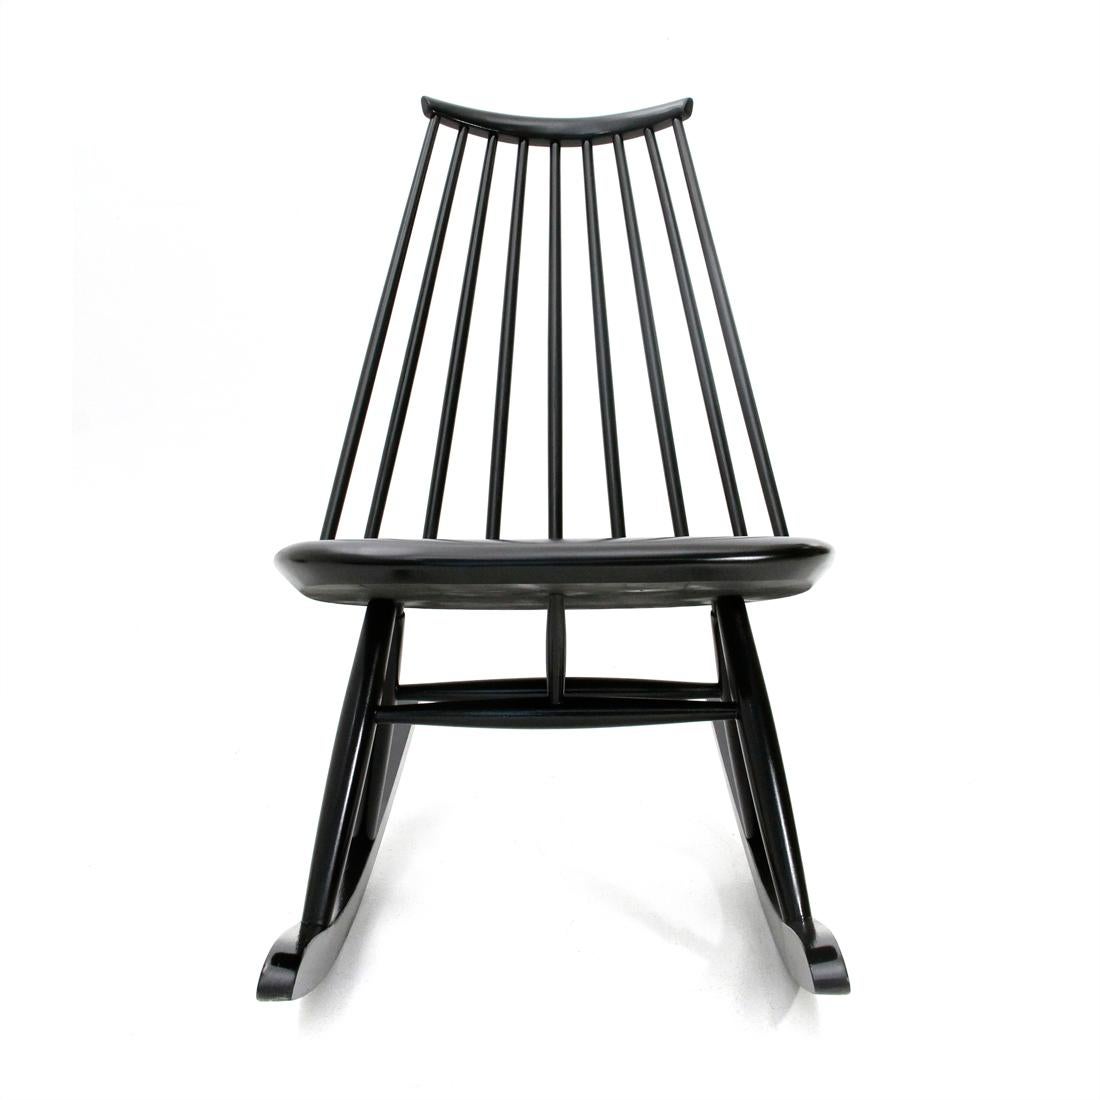 Rocking chair produced by Artek in the 1950s based on a design by Ilmari Tapiovaara.
Structure in solid birch black painted.
Completely restored.
Good general conditions, some signs due to normal use over time.

Dimensions: Length 55 cm, depth